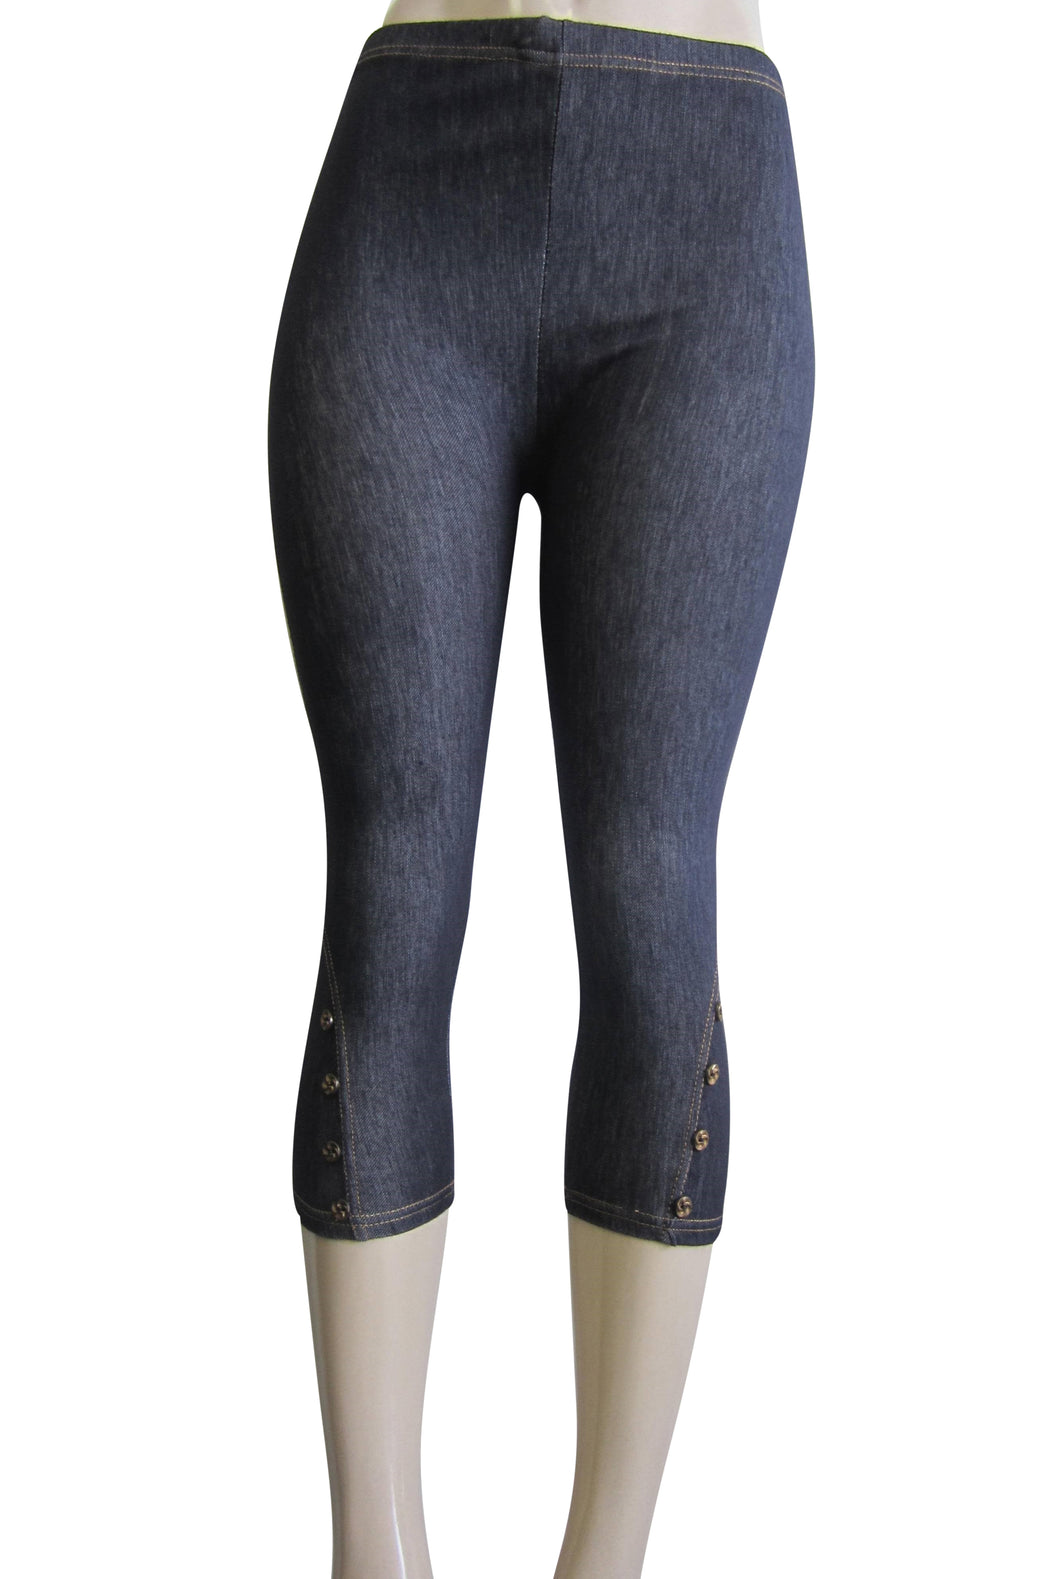 Denim Leggings with Blue Butterfly and Daisy Pattern - Its All Leggings